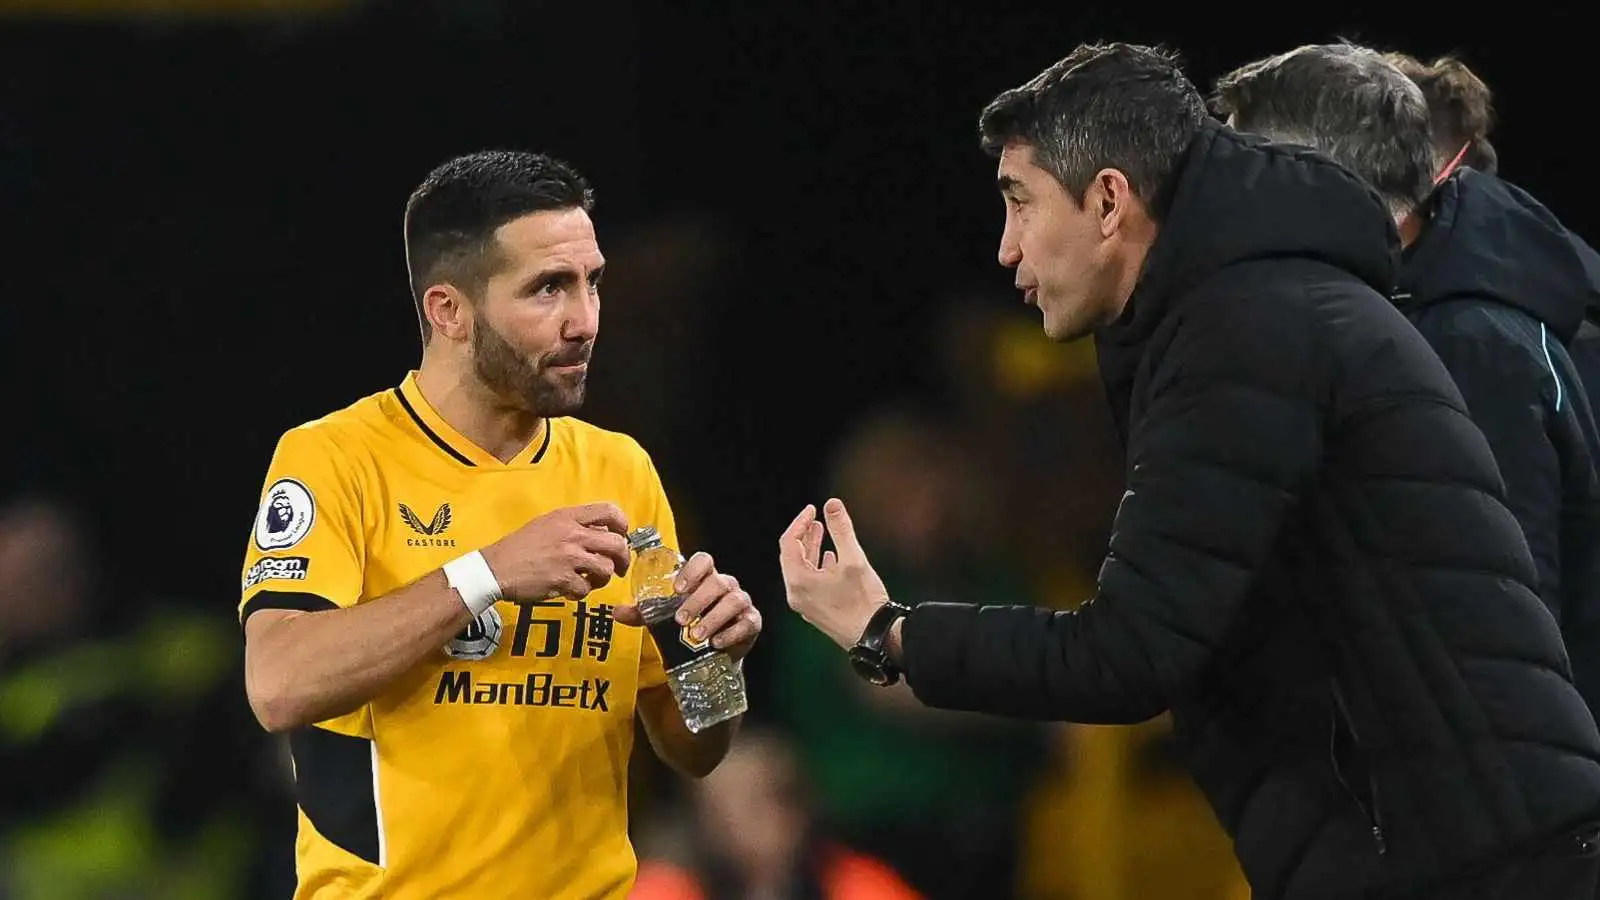 Joao Moutinho receiving instructions from Bruno Lage